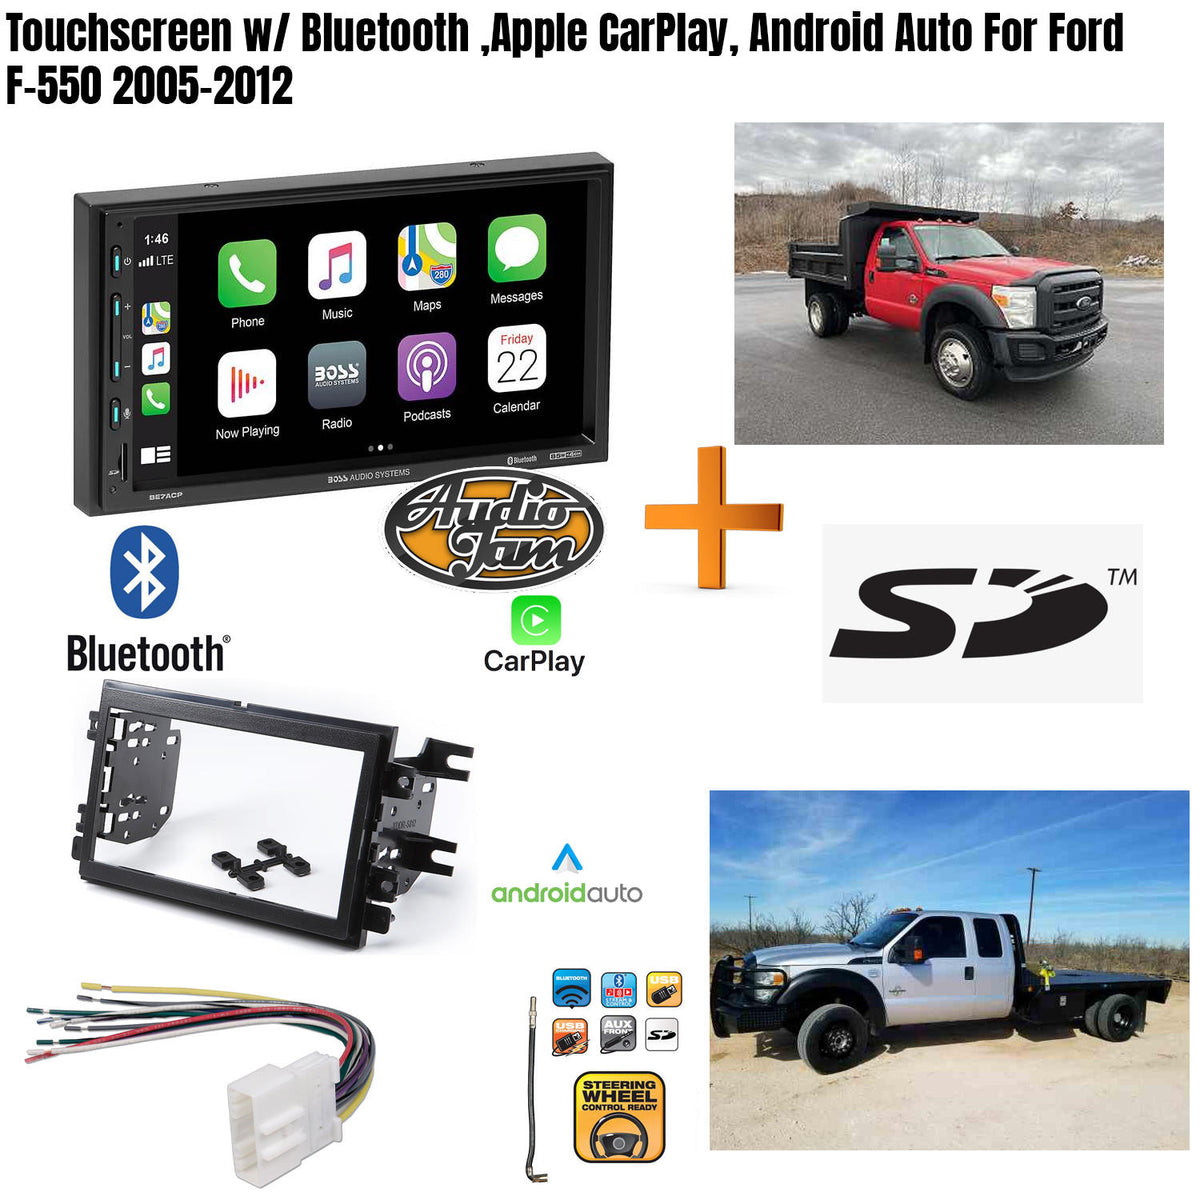 Touchscreen w/ Bluetooth ,Apple CarPlay, Android Auto For Ford F-550 2005-2012